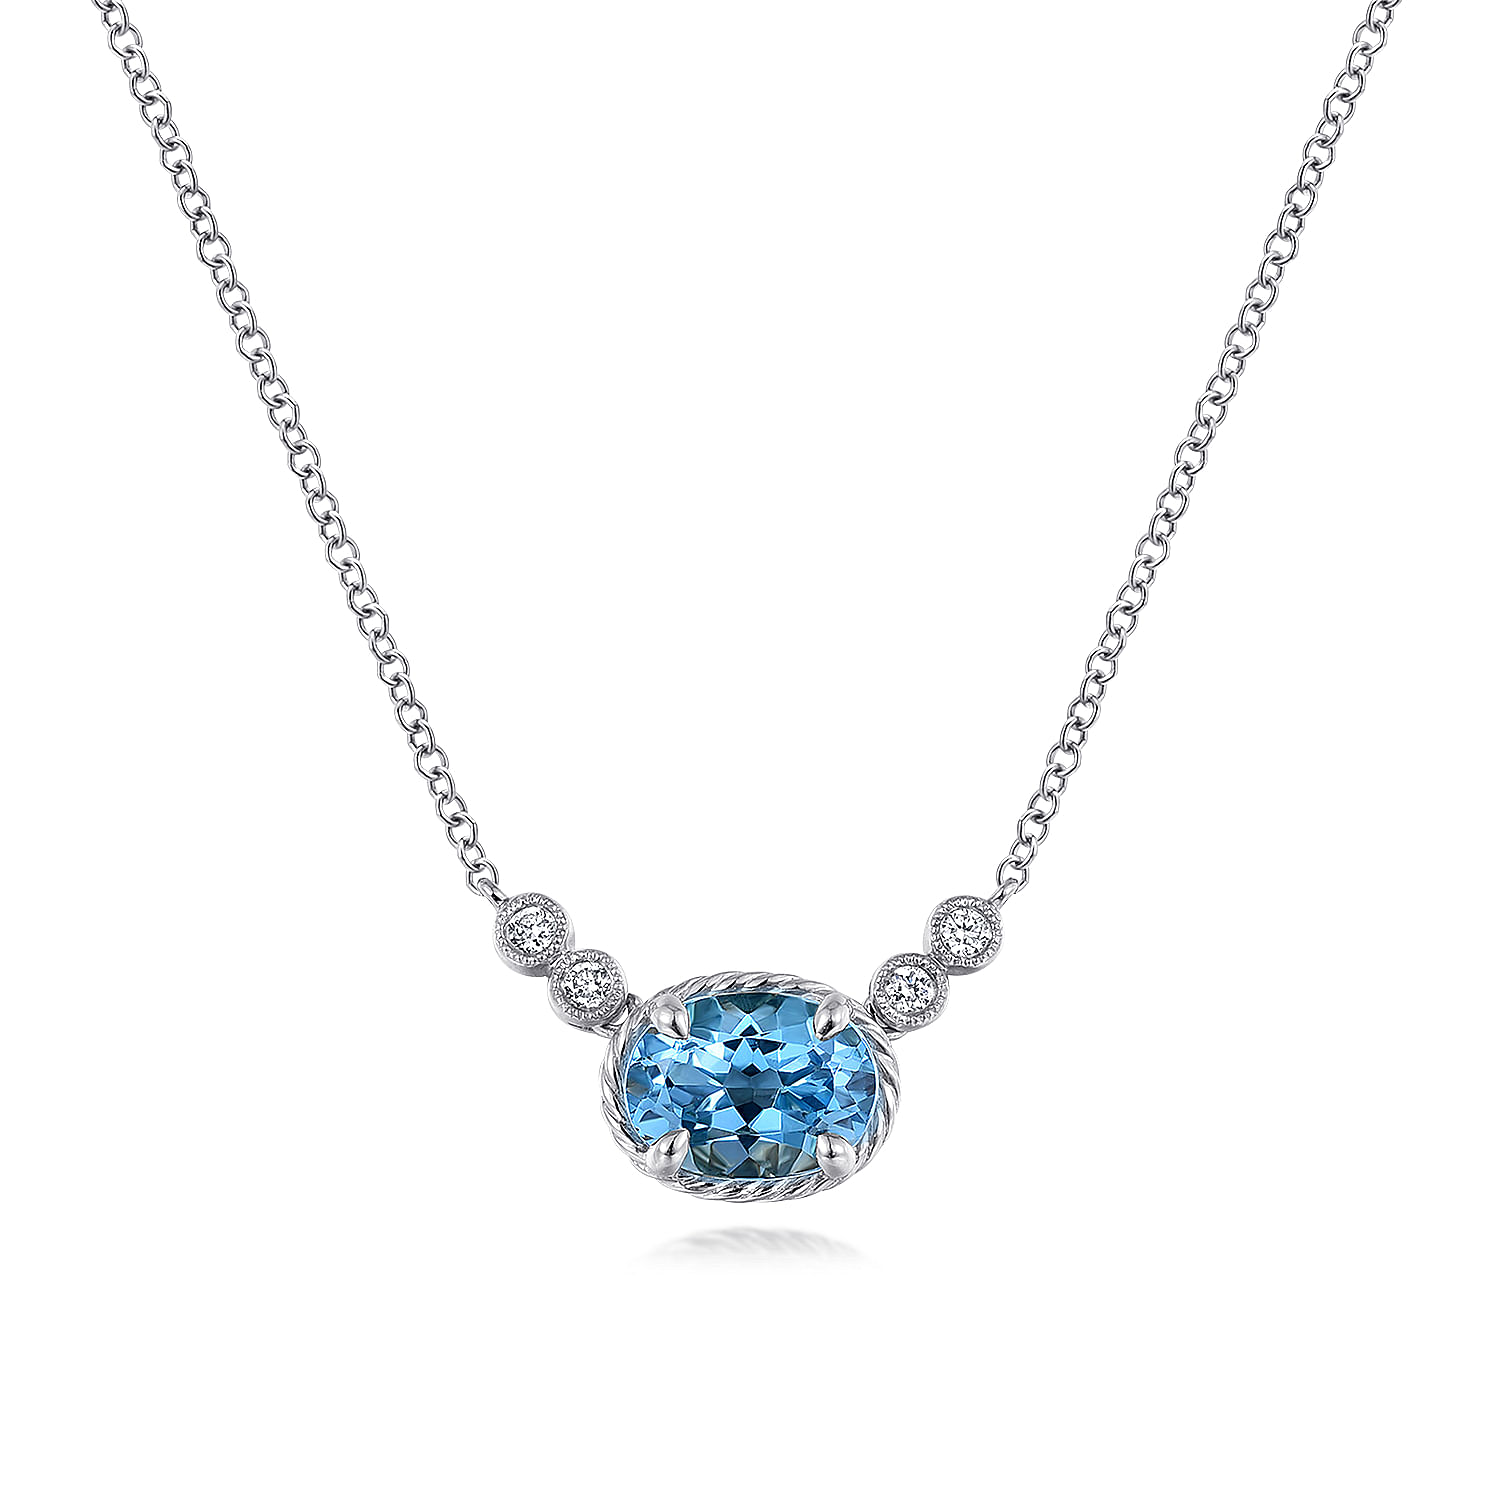 Gabriel - 14K White Gold Oval Swiss Blue Topaz Pendant Necklace with Diamond Accents